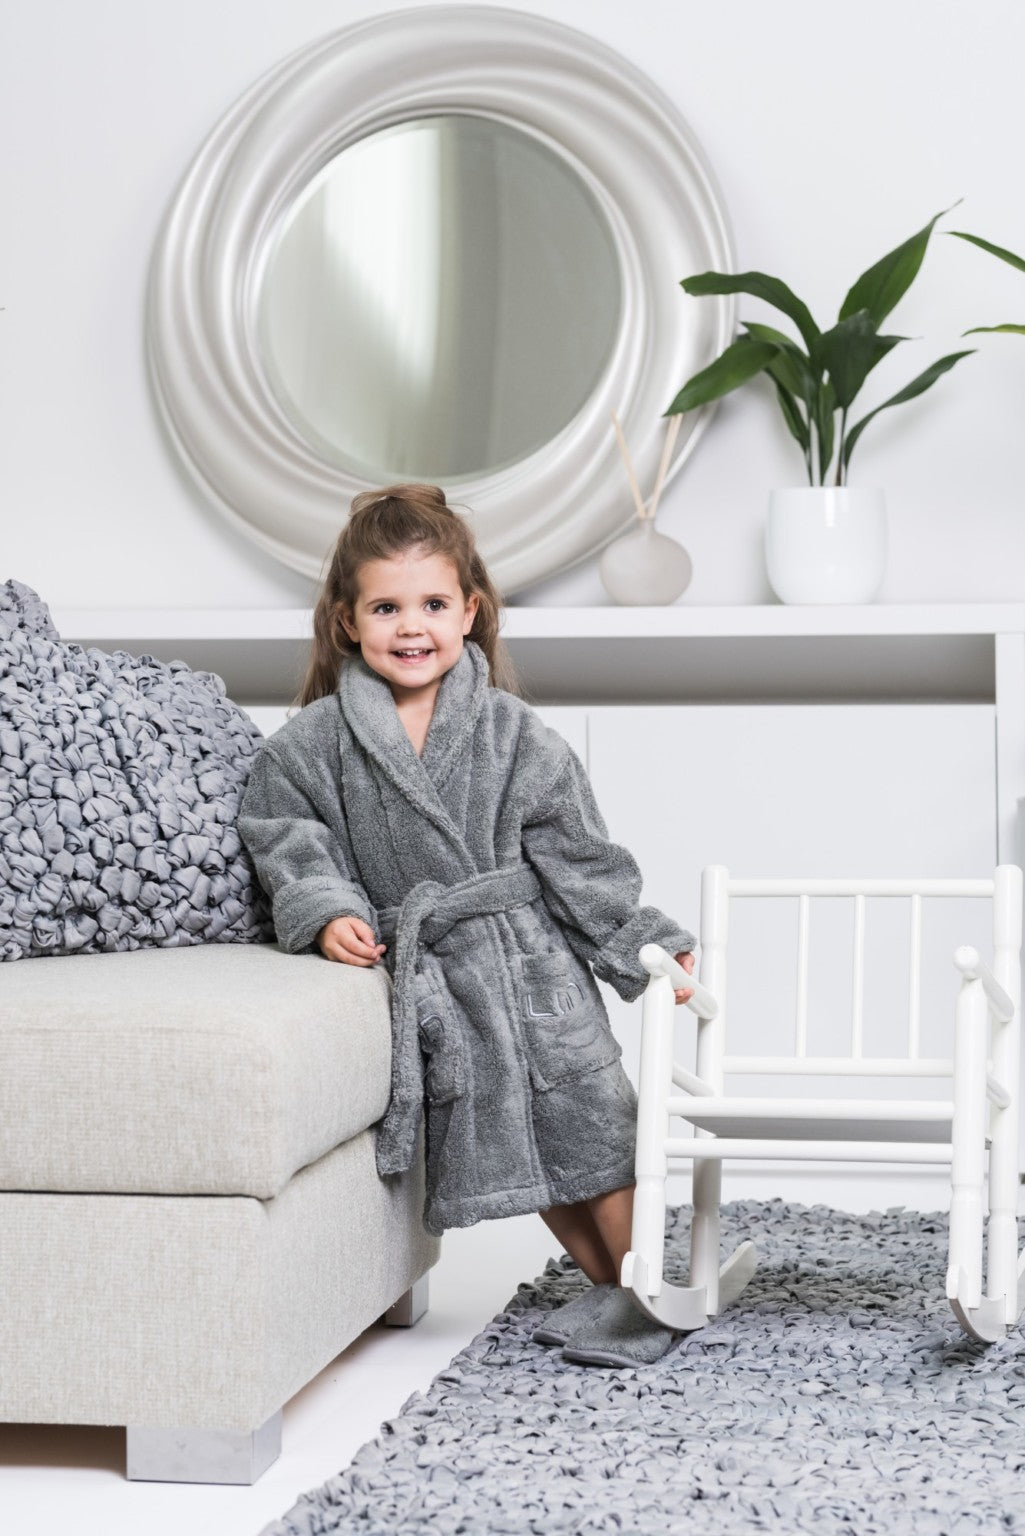 Luin Living Bathrobe for the Whole Family, 8 different sizes, Granite